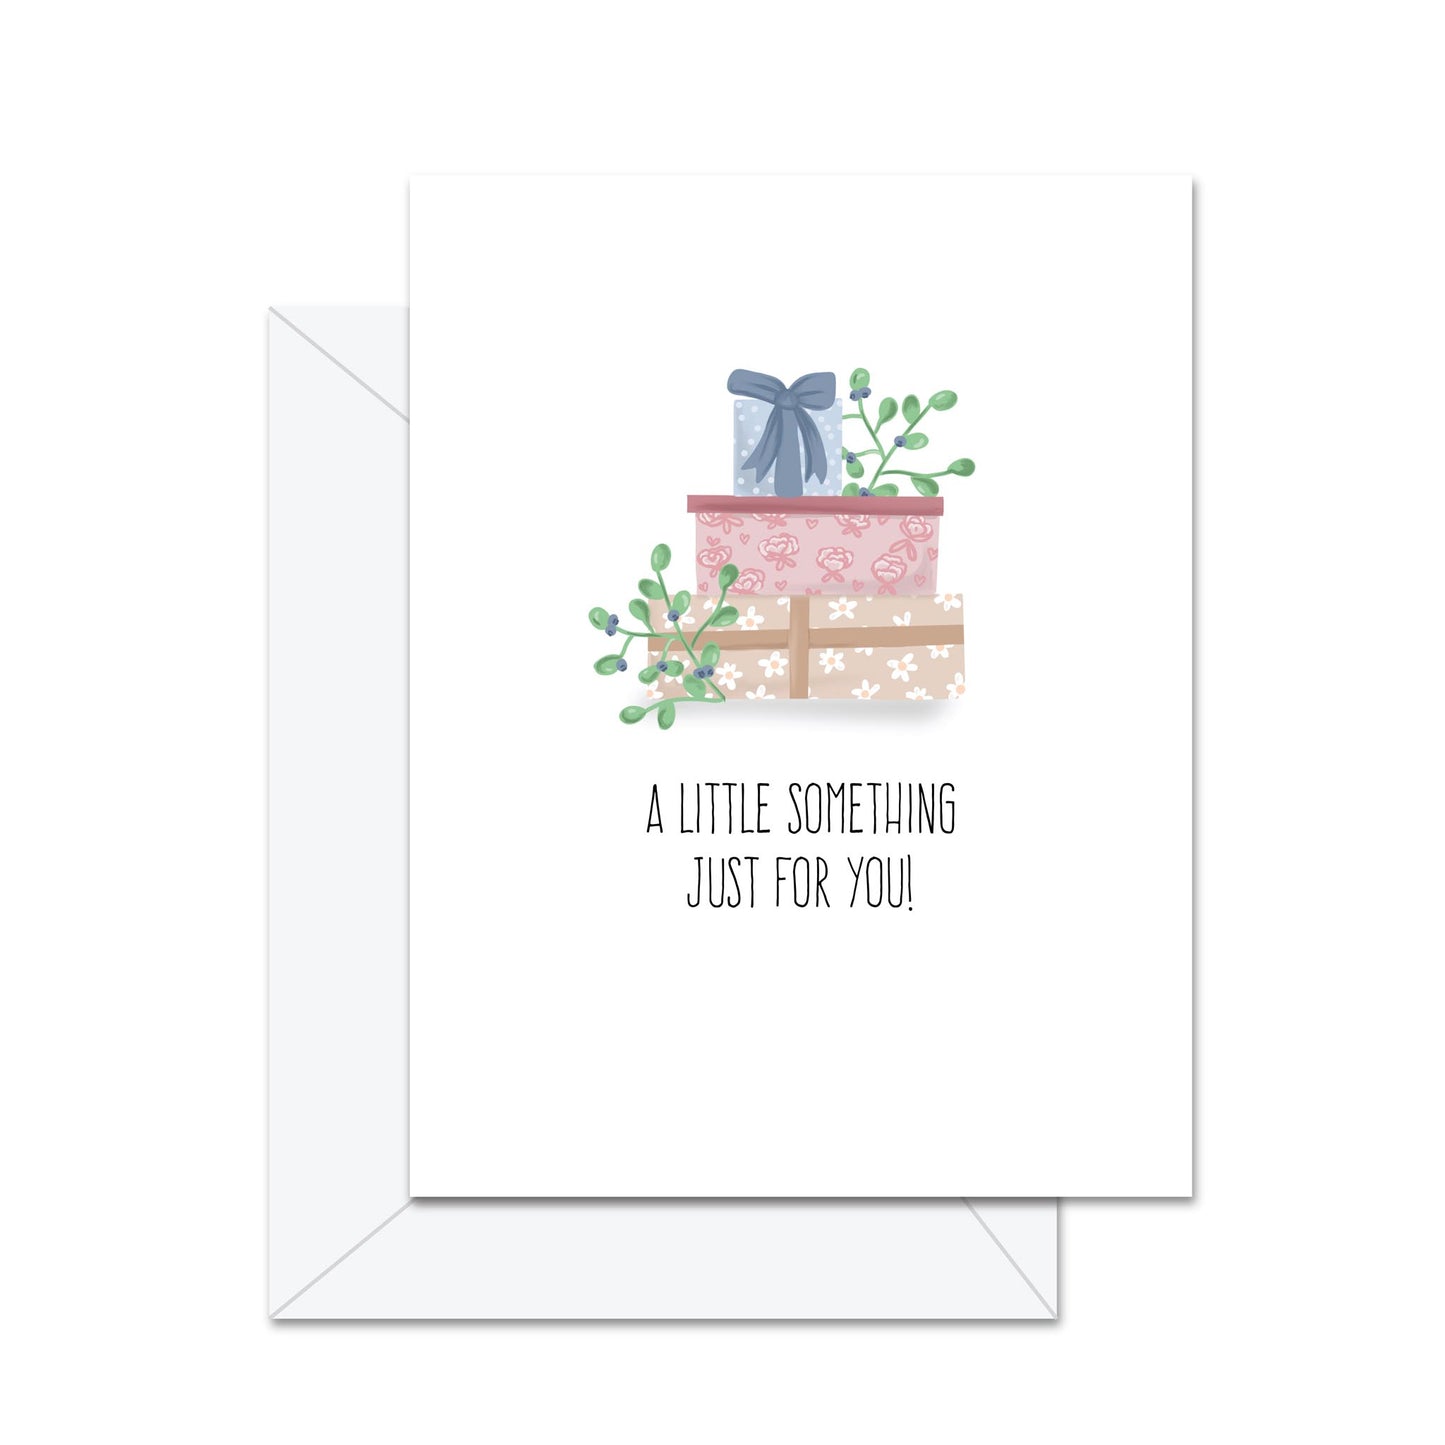 A Little Something Just For You! - Greeting Card